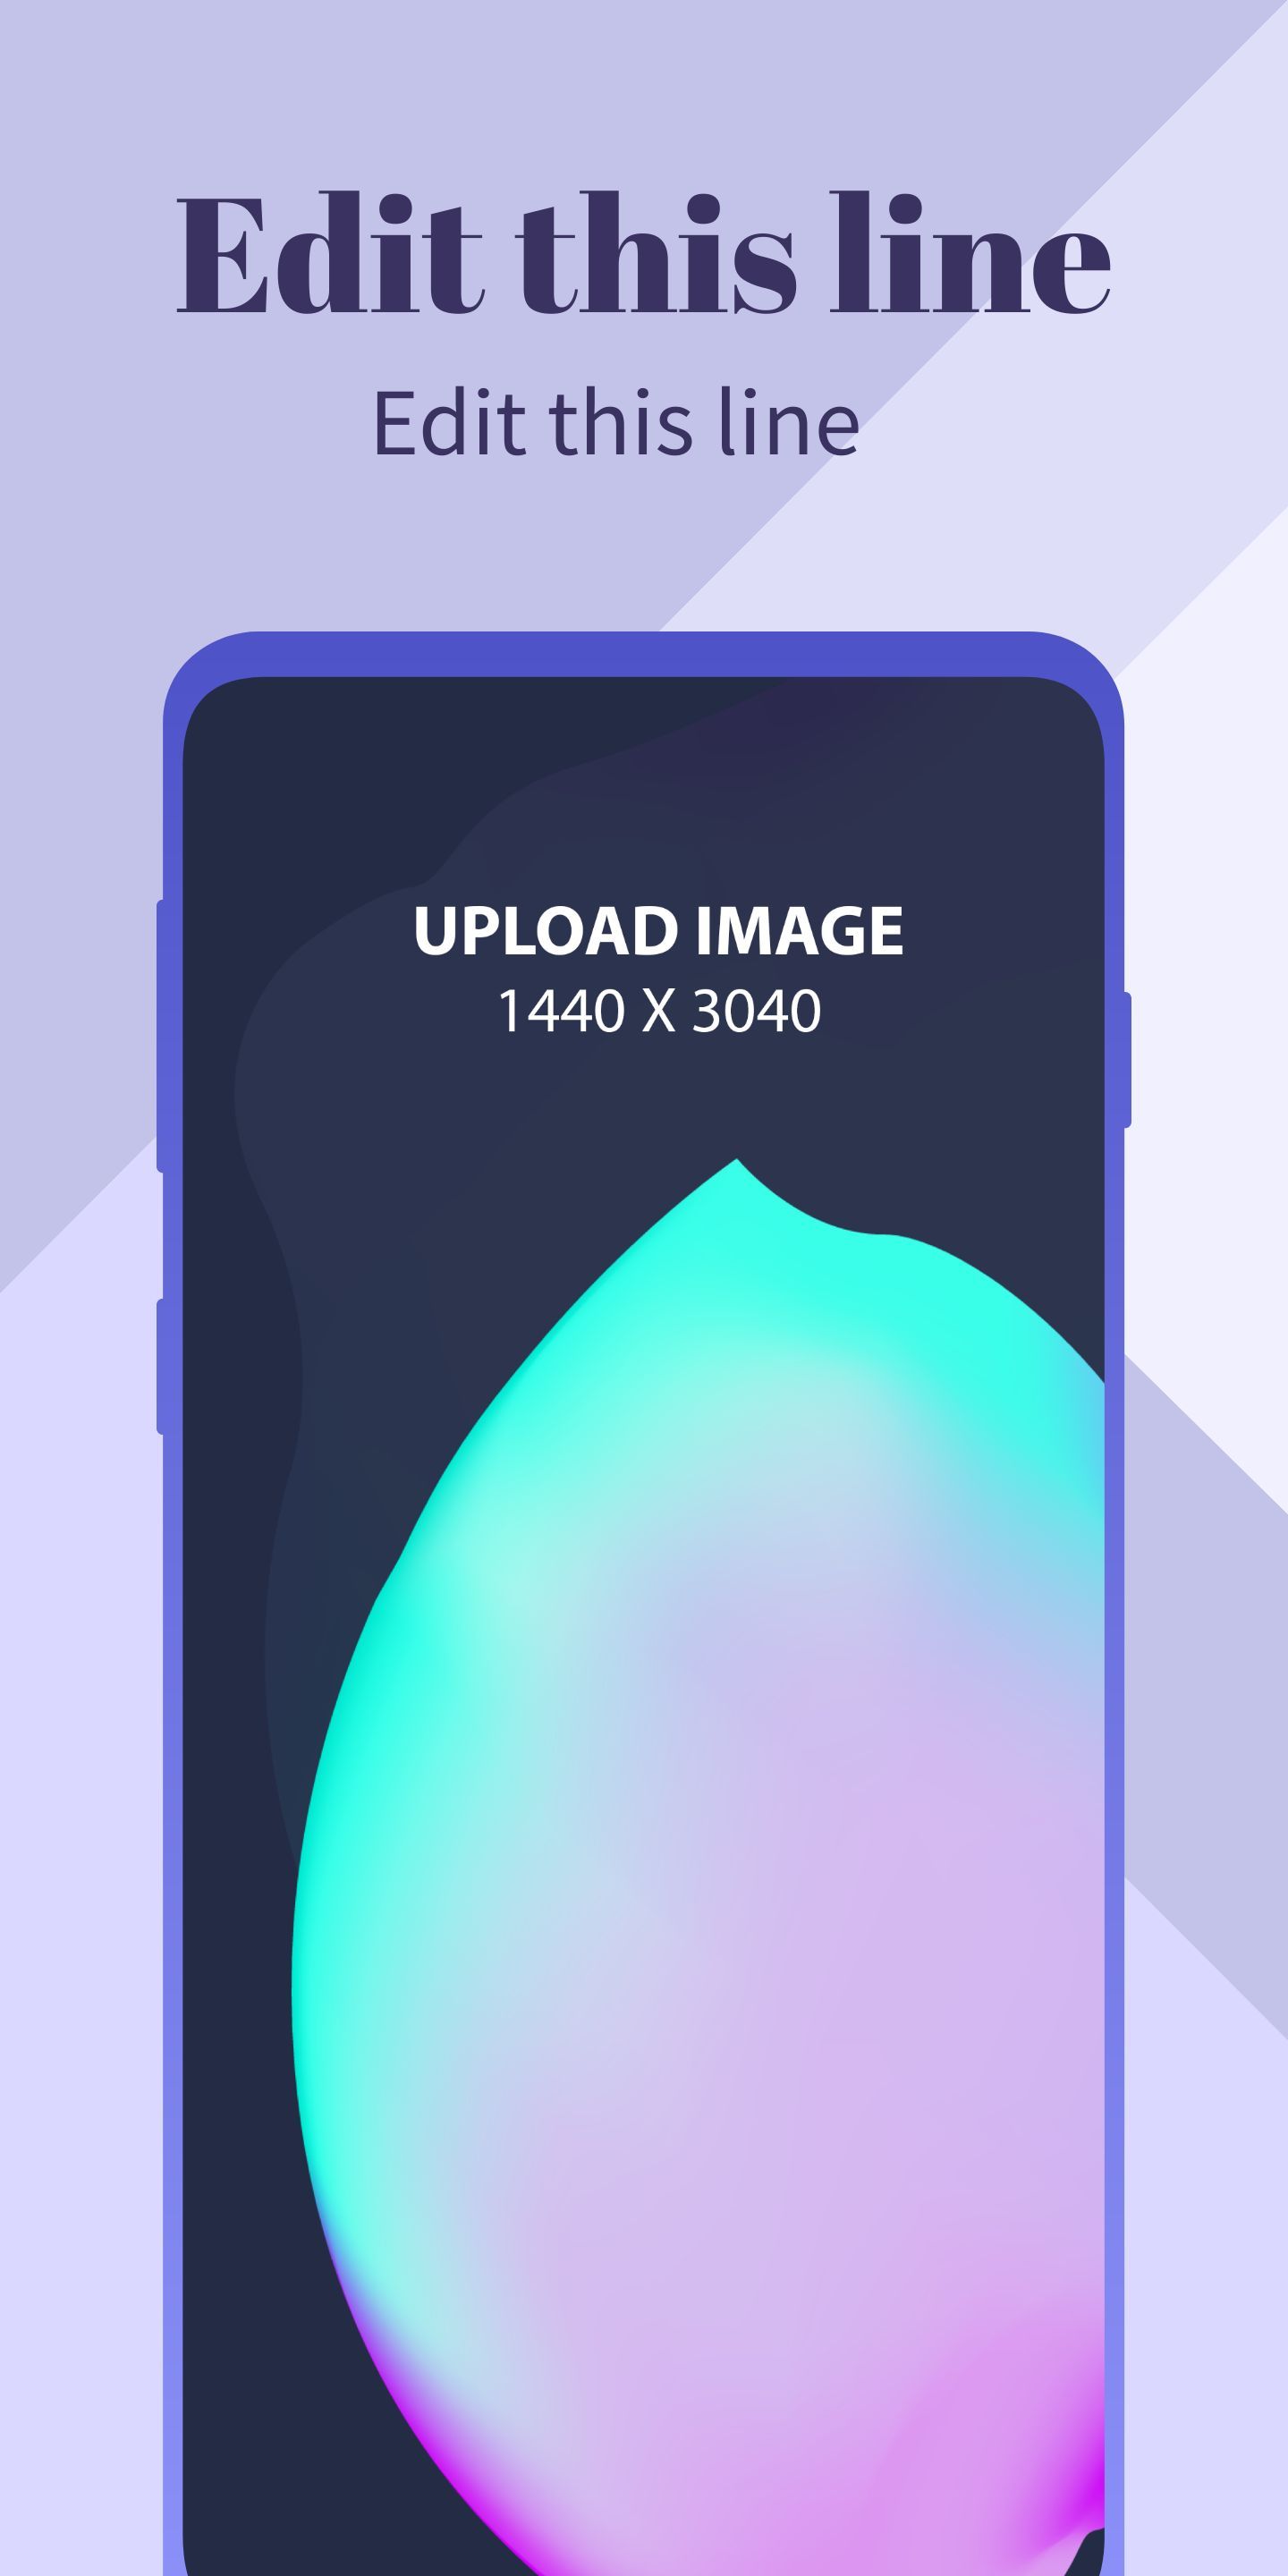 Samsung S10 Screenshot 5 template. Quickly edit text, colors, images, and more for free.